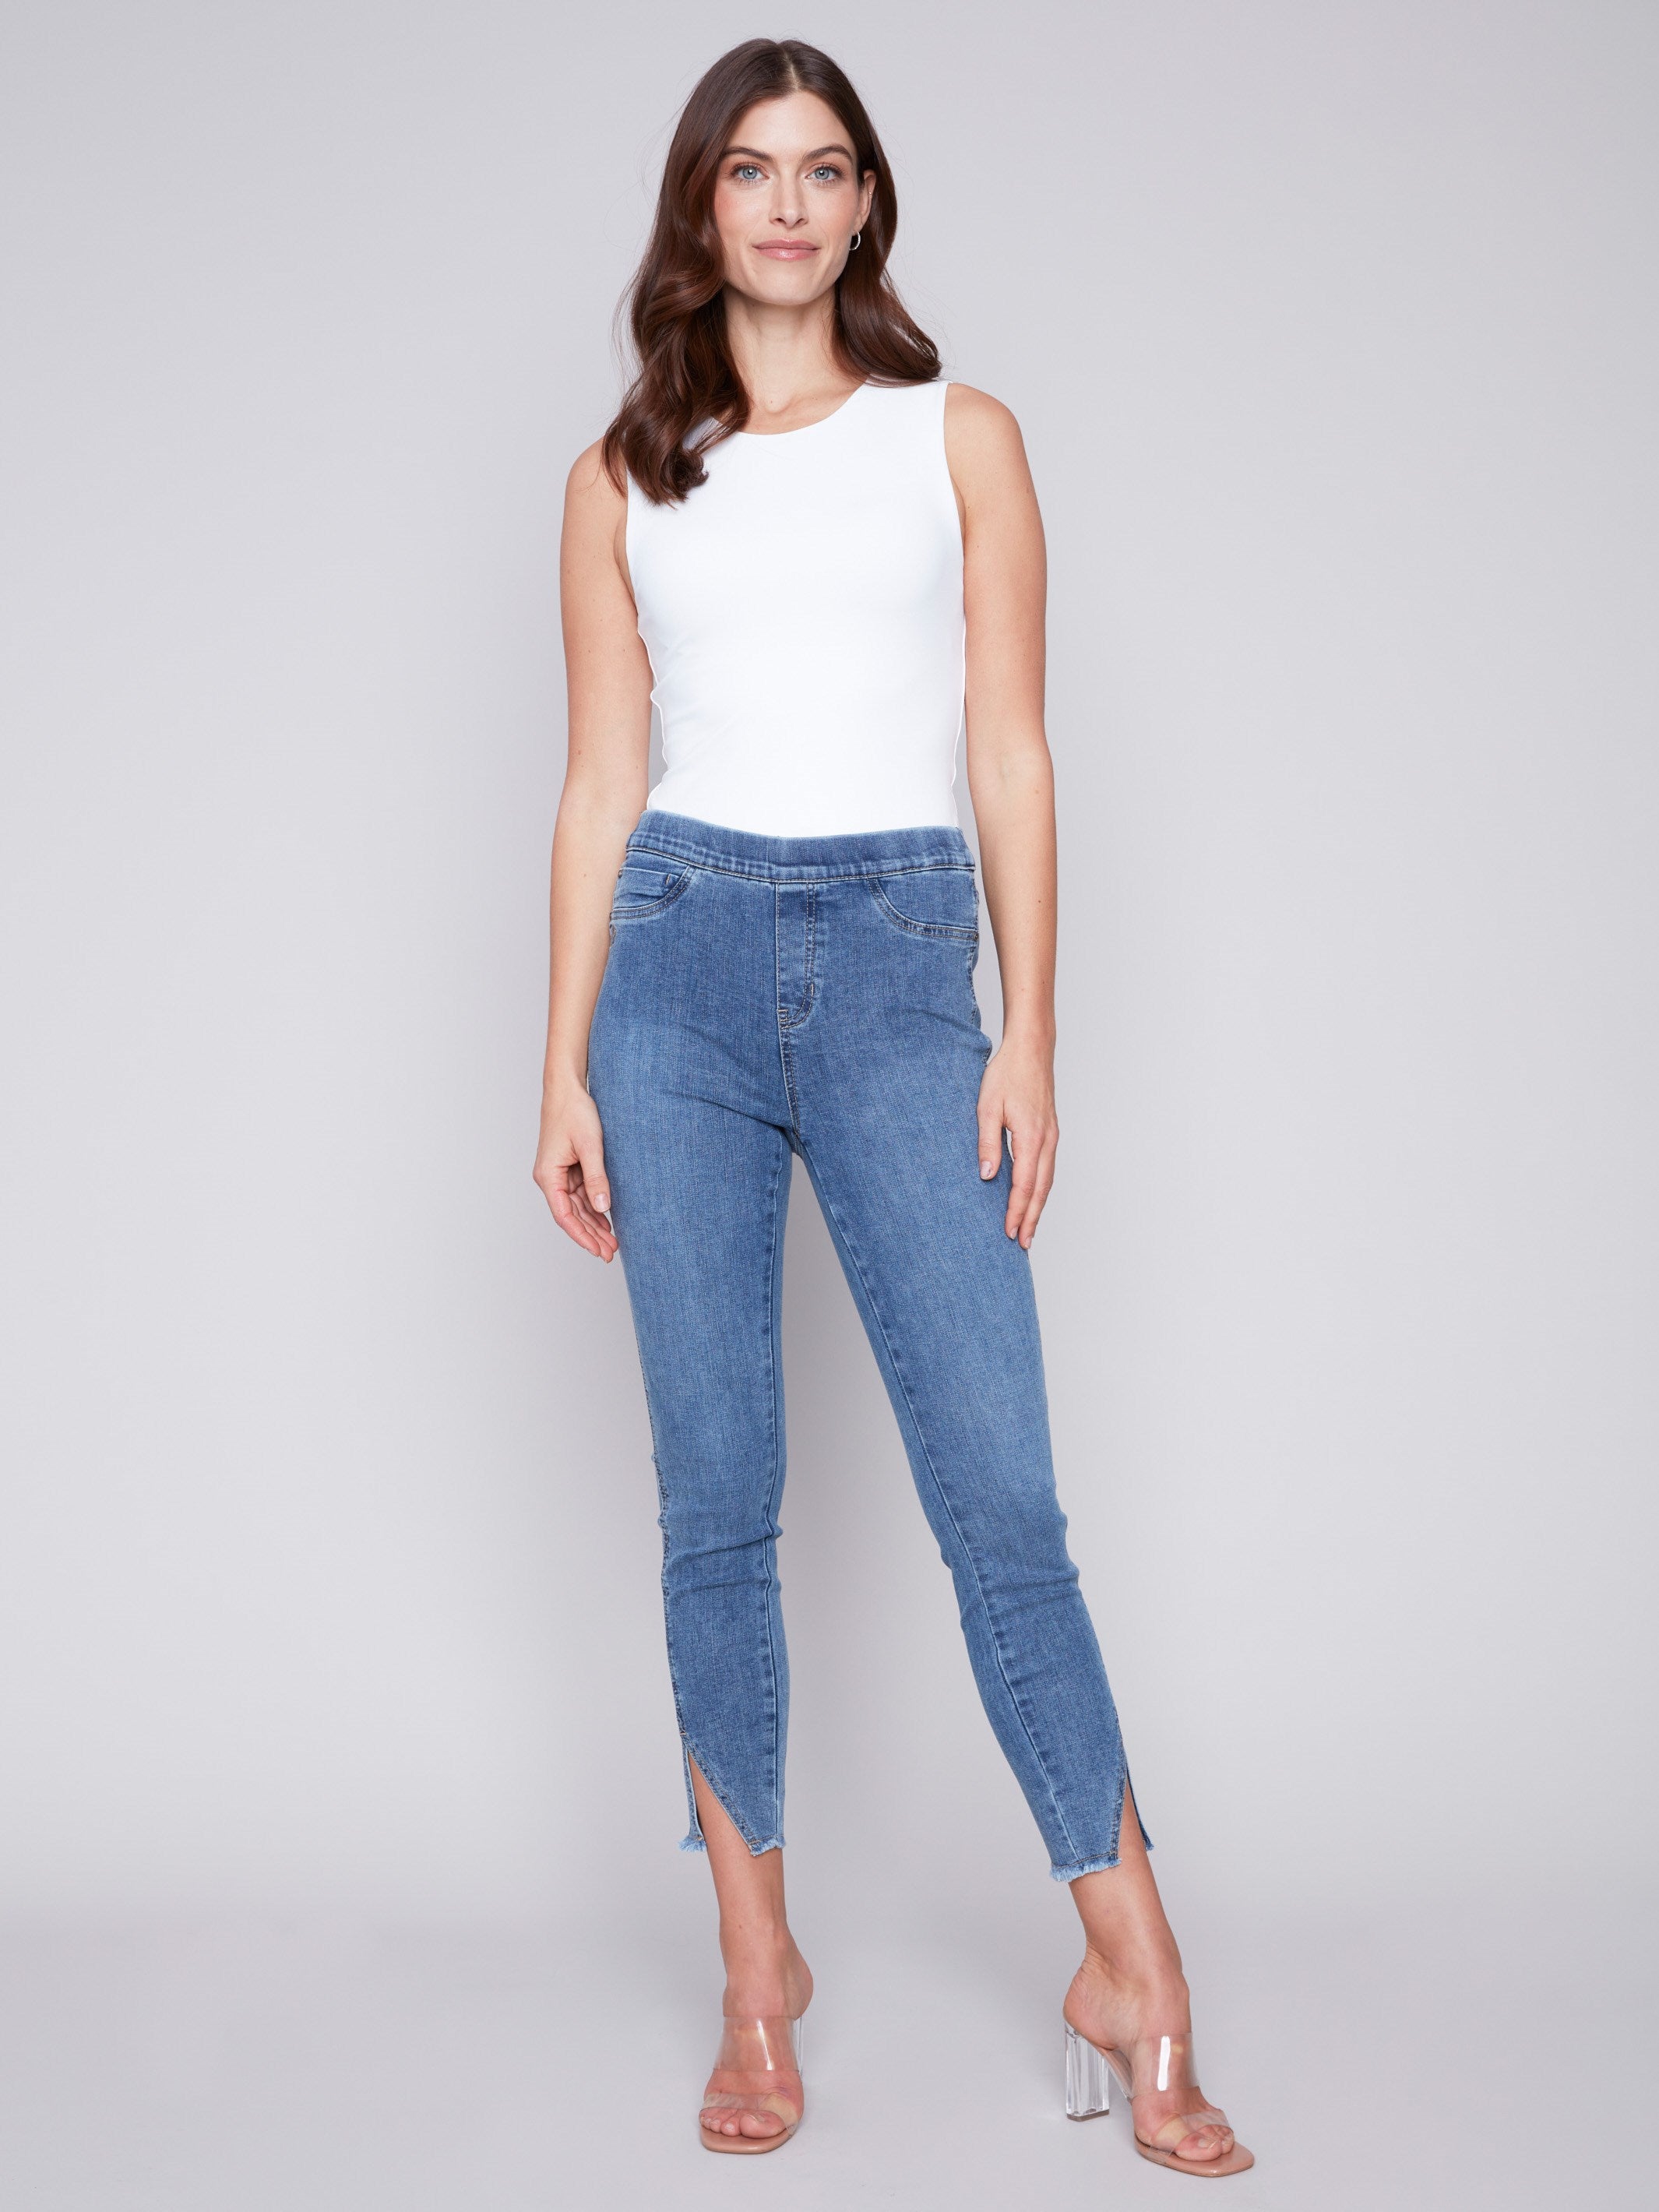 Pull-On Jeans with Split Hem - Medium Blue - Charlie B Collection Canada - Image 4